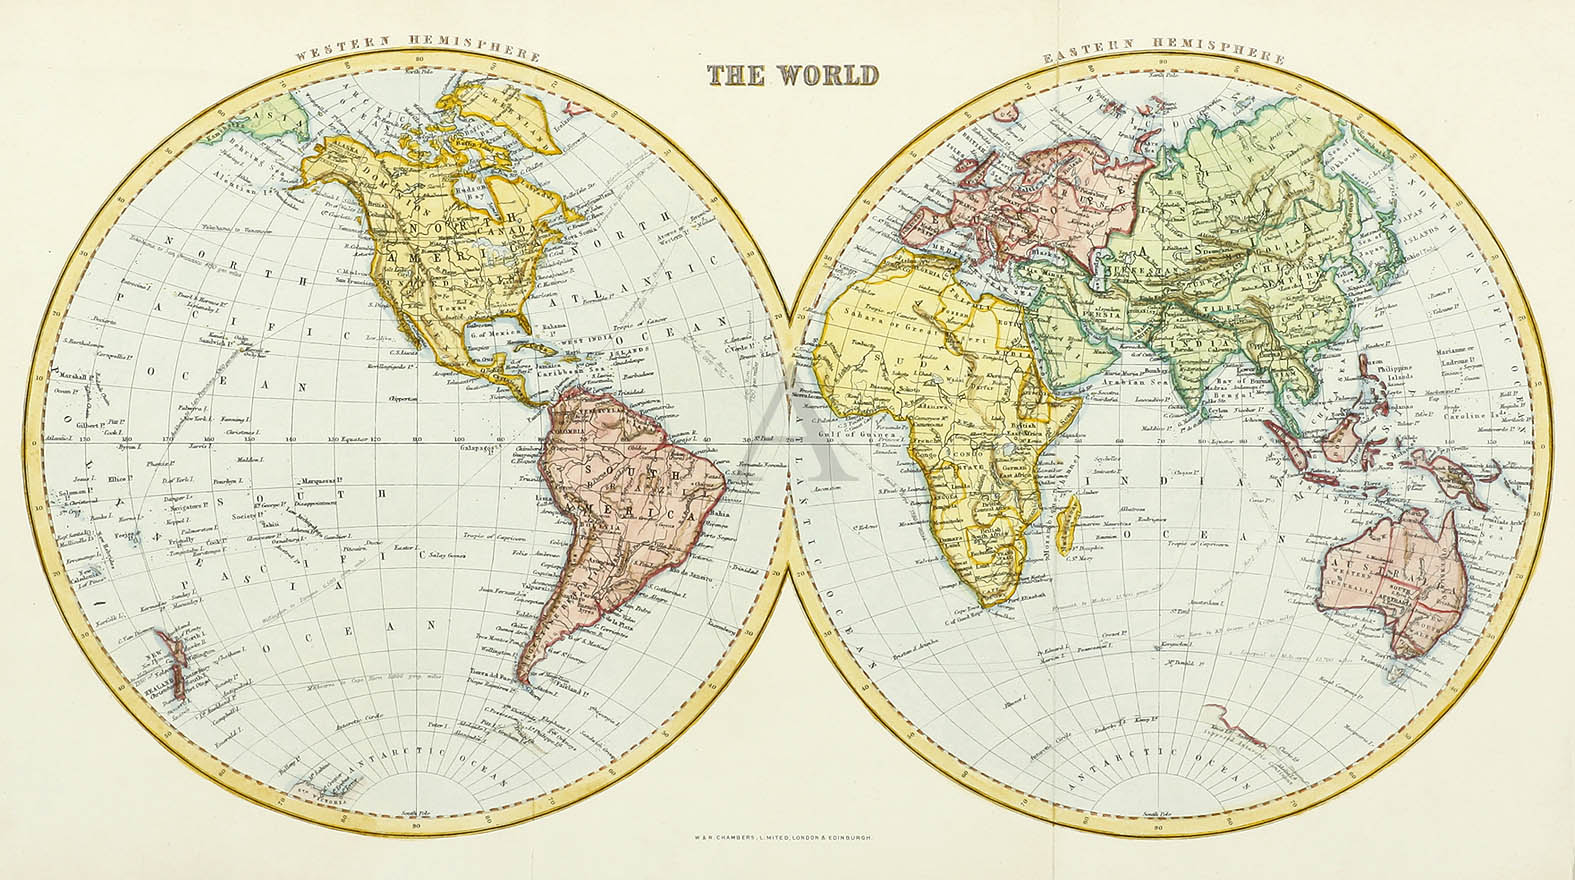 The World - Antique Print from 1880